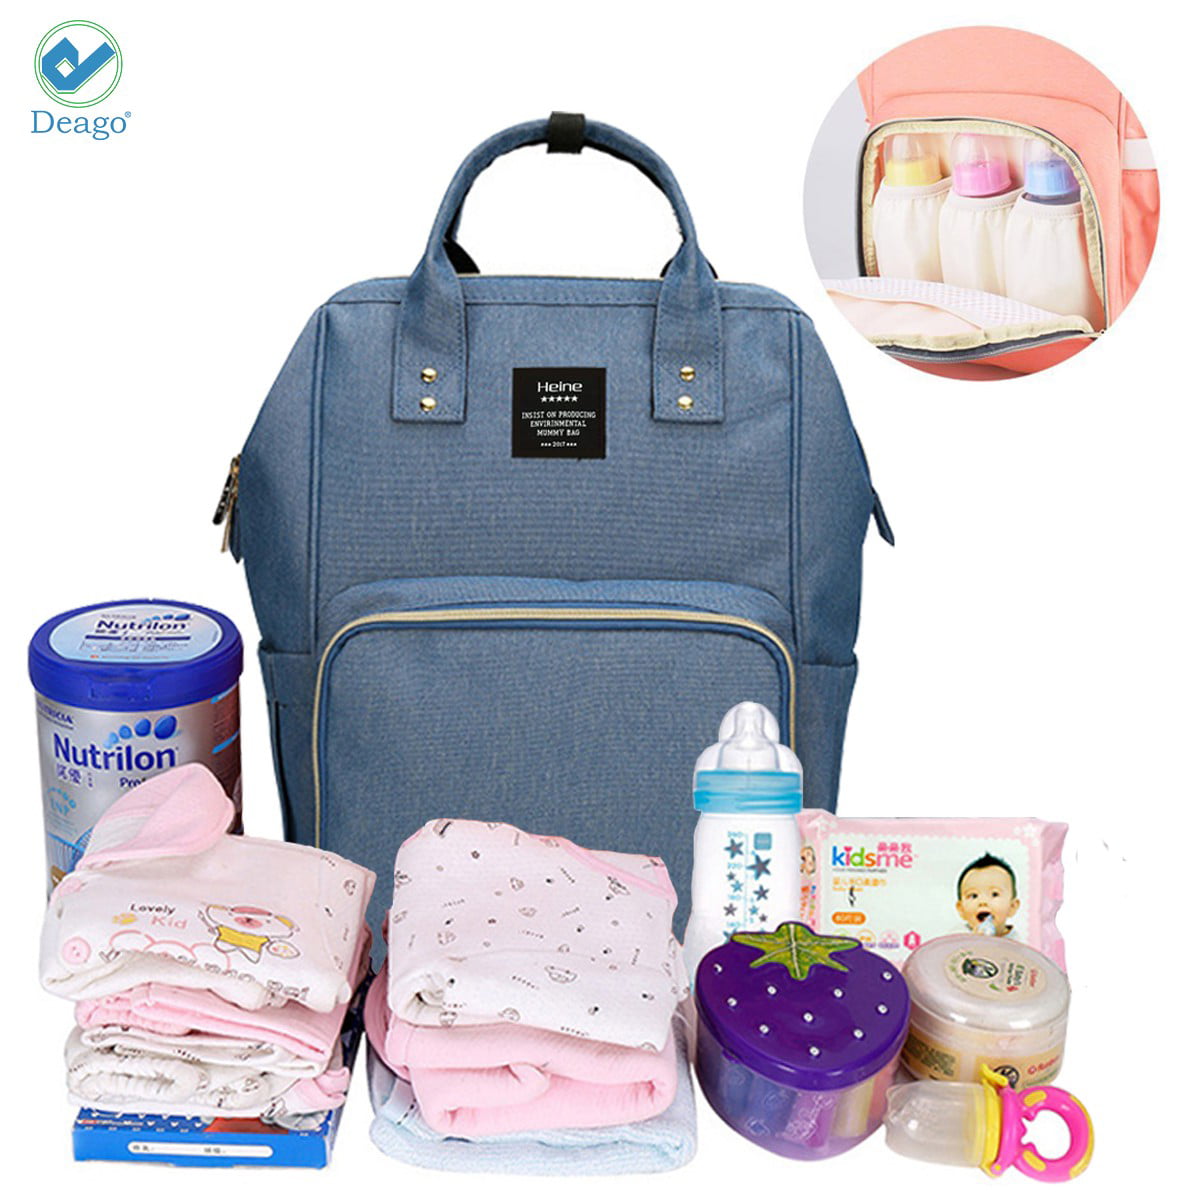 Diaper Bag for Baby by Multifunction Large Capacity Waterproof Insulated Mummy Bag Five Pieces from Mother and Child Package Shoulder Bag with Changing pad Navy